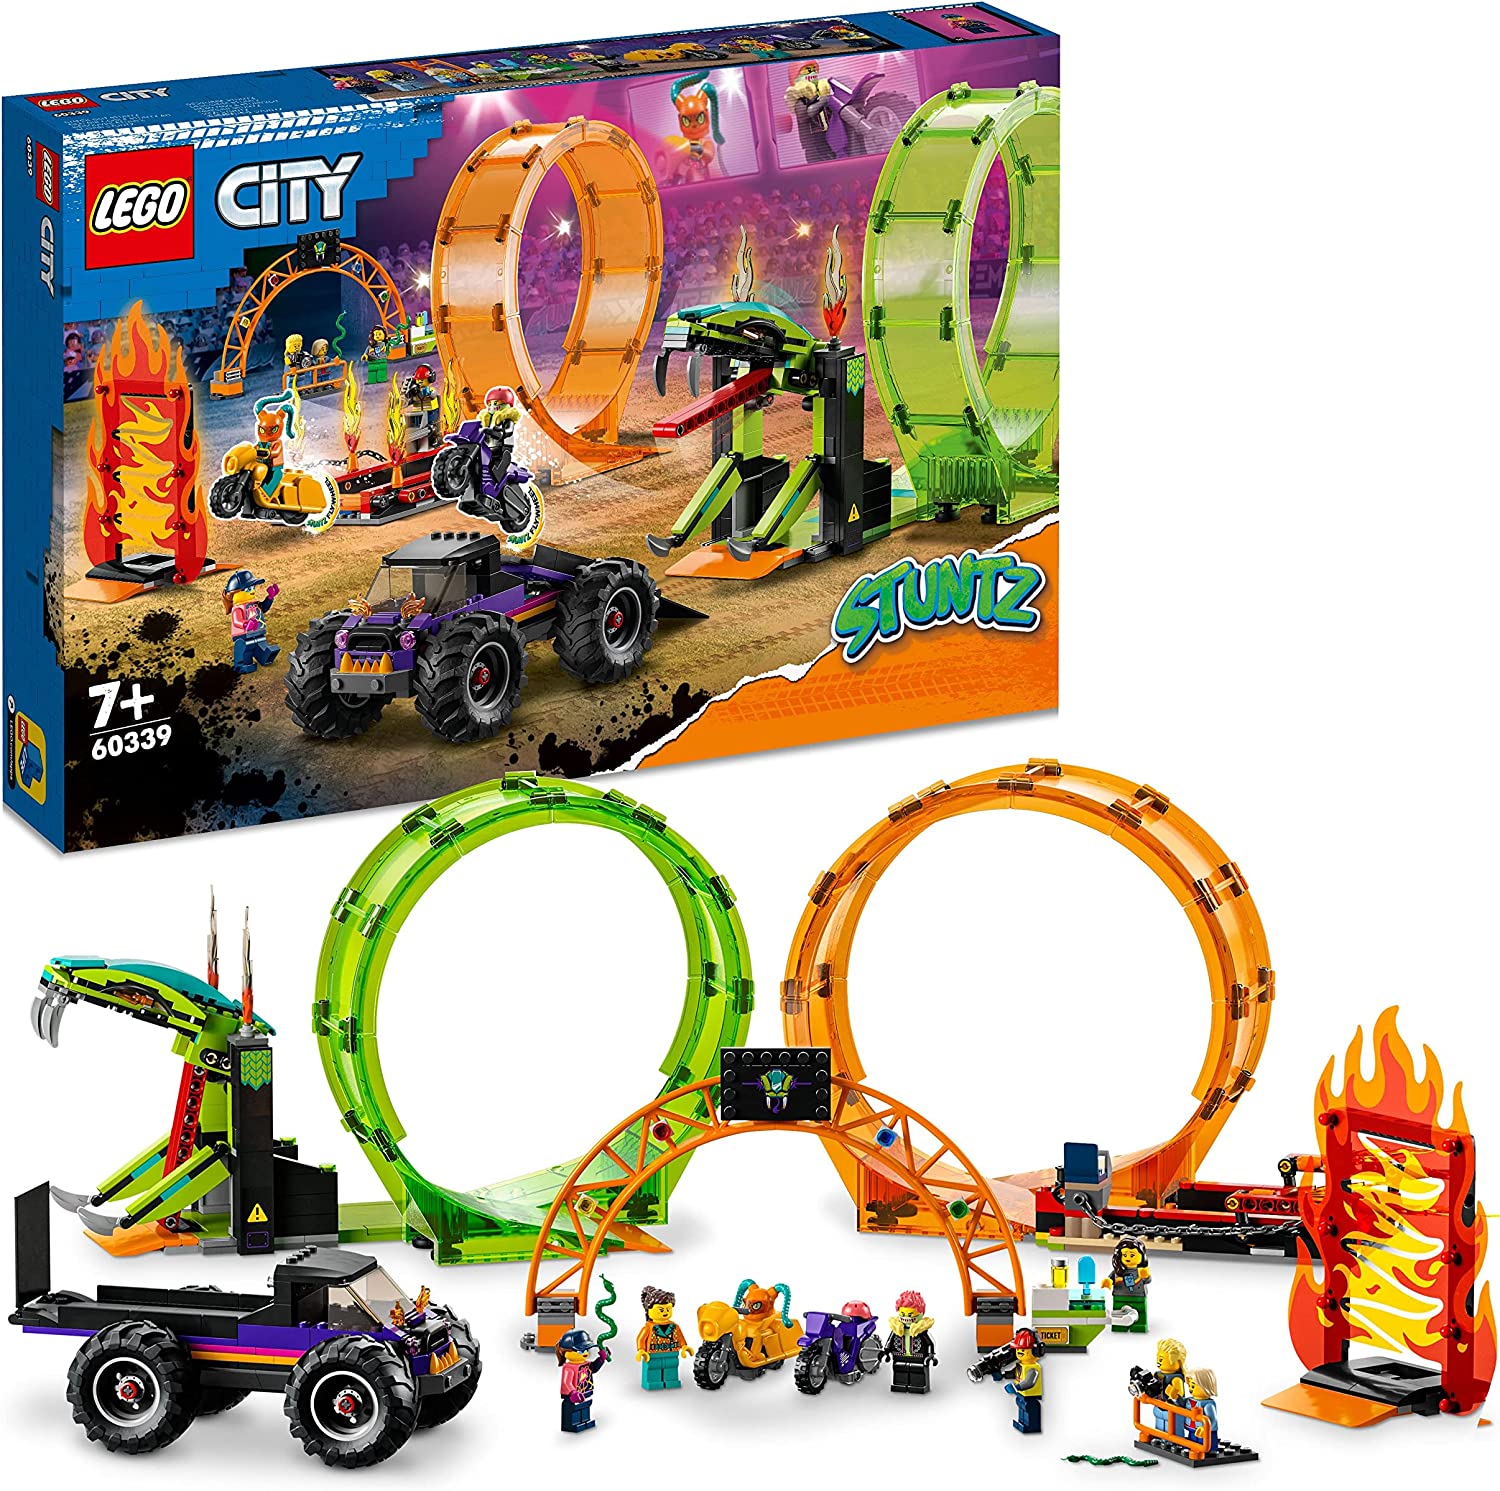 LEGO 60339 City Stuntz Stuntshow Double Looping Set Including Ramp, Monster Truck, 2 x Motorcycle and 7 Mini Figures, Toy for Children from 7 Years